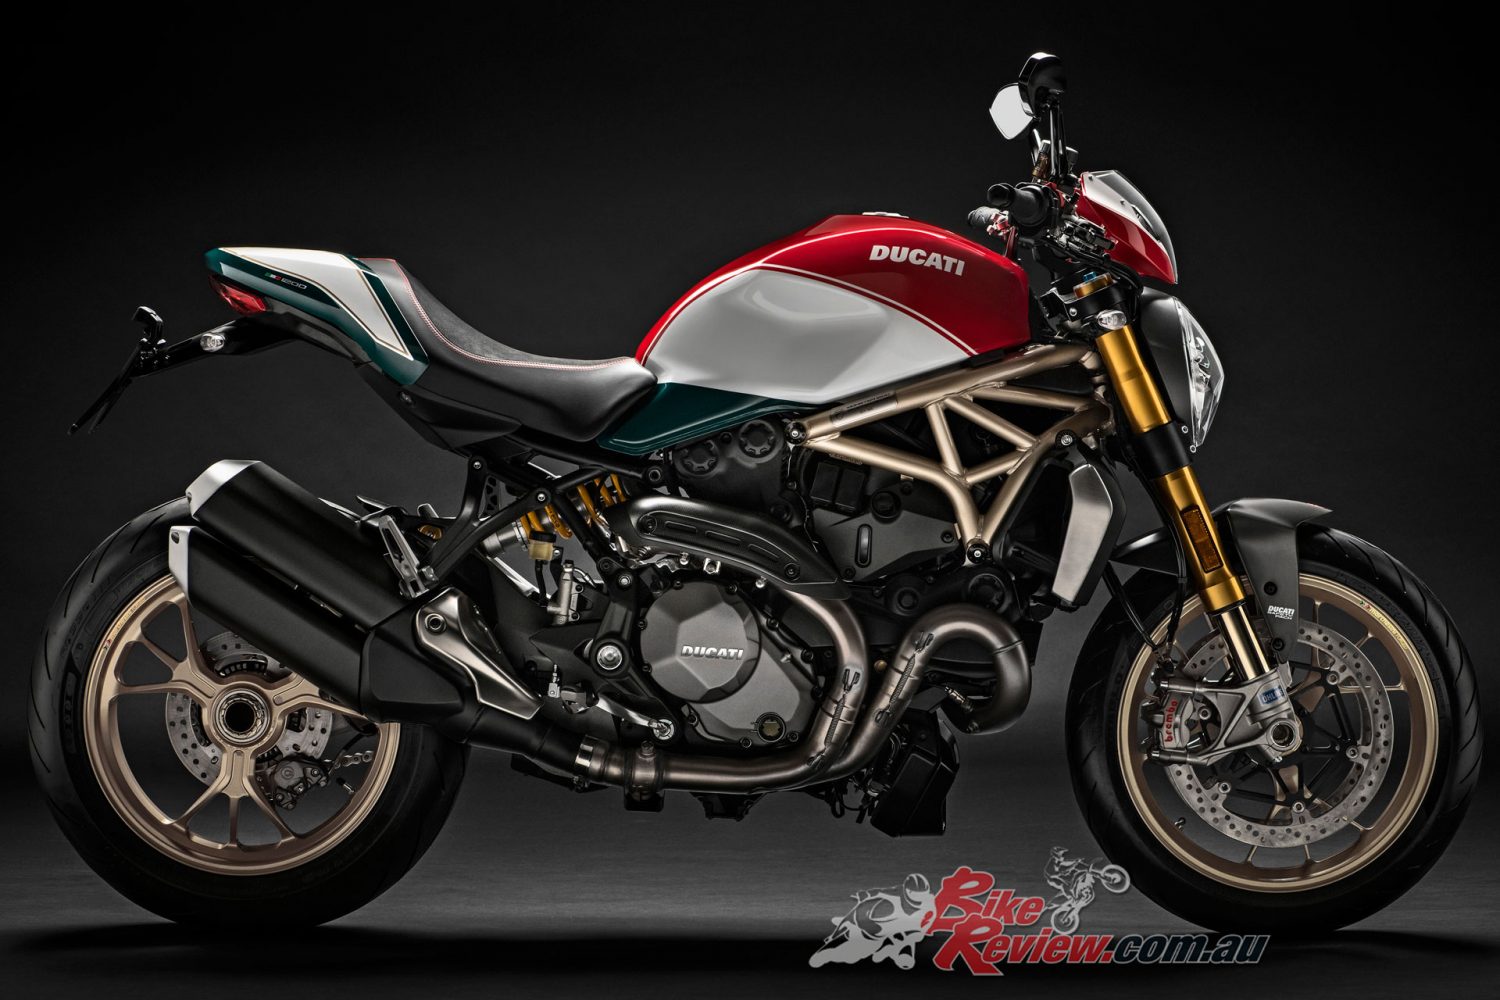 Monster 1200S Ducati 2018 Powerful Naked Bike - Review 